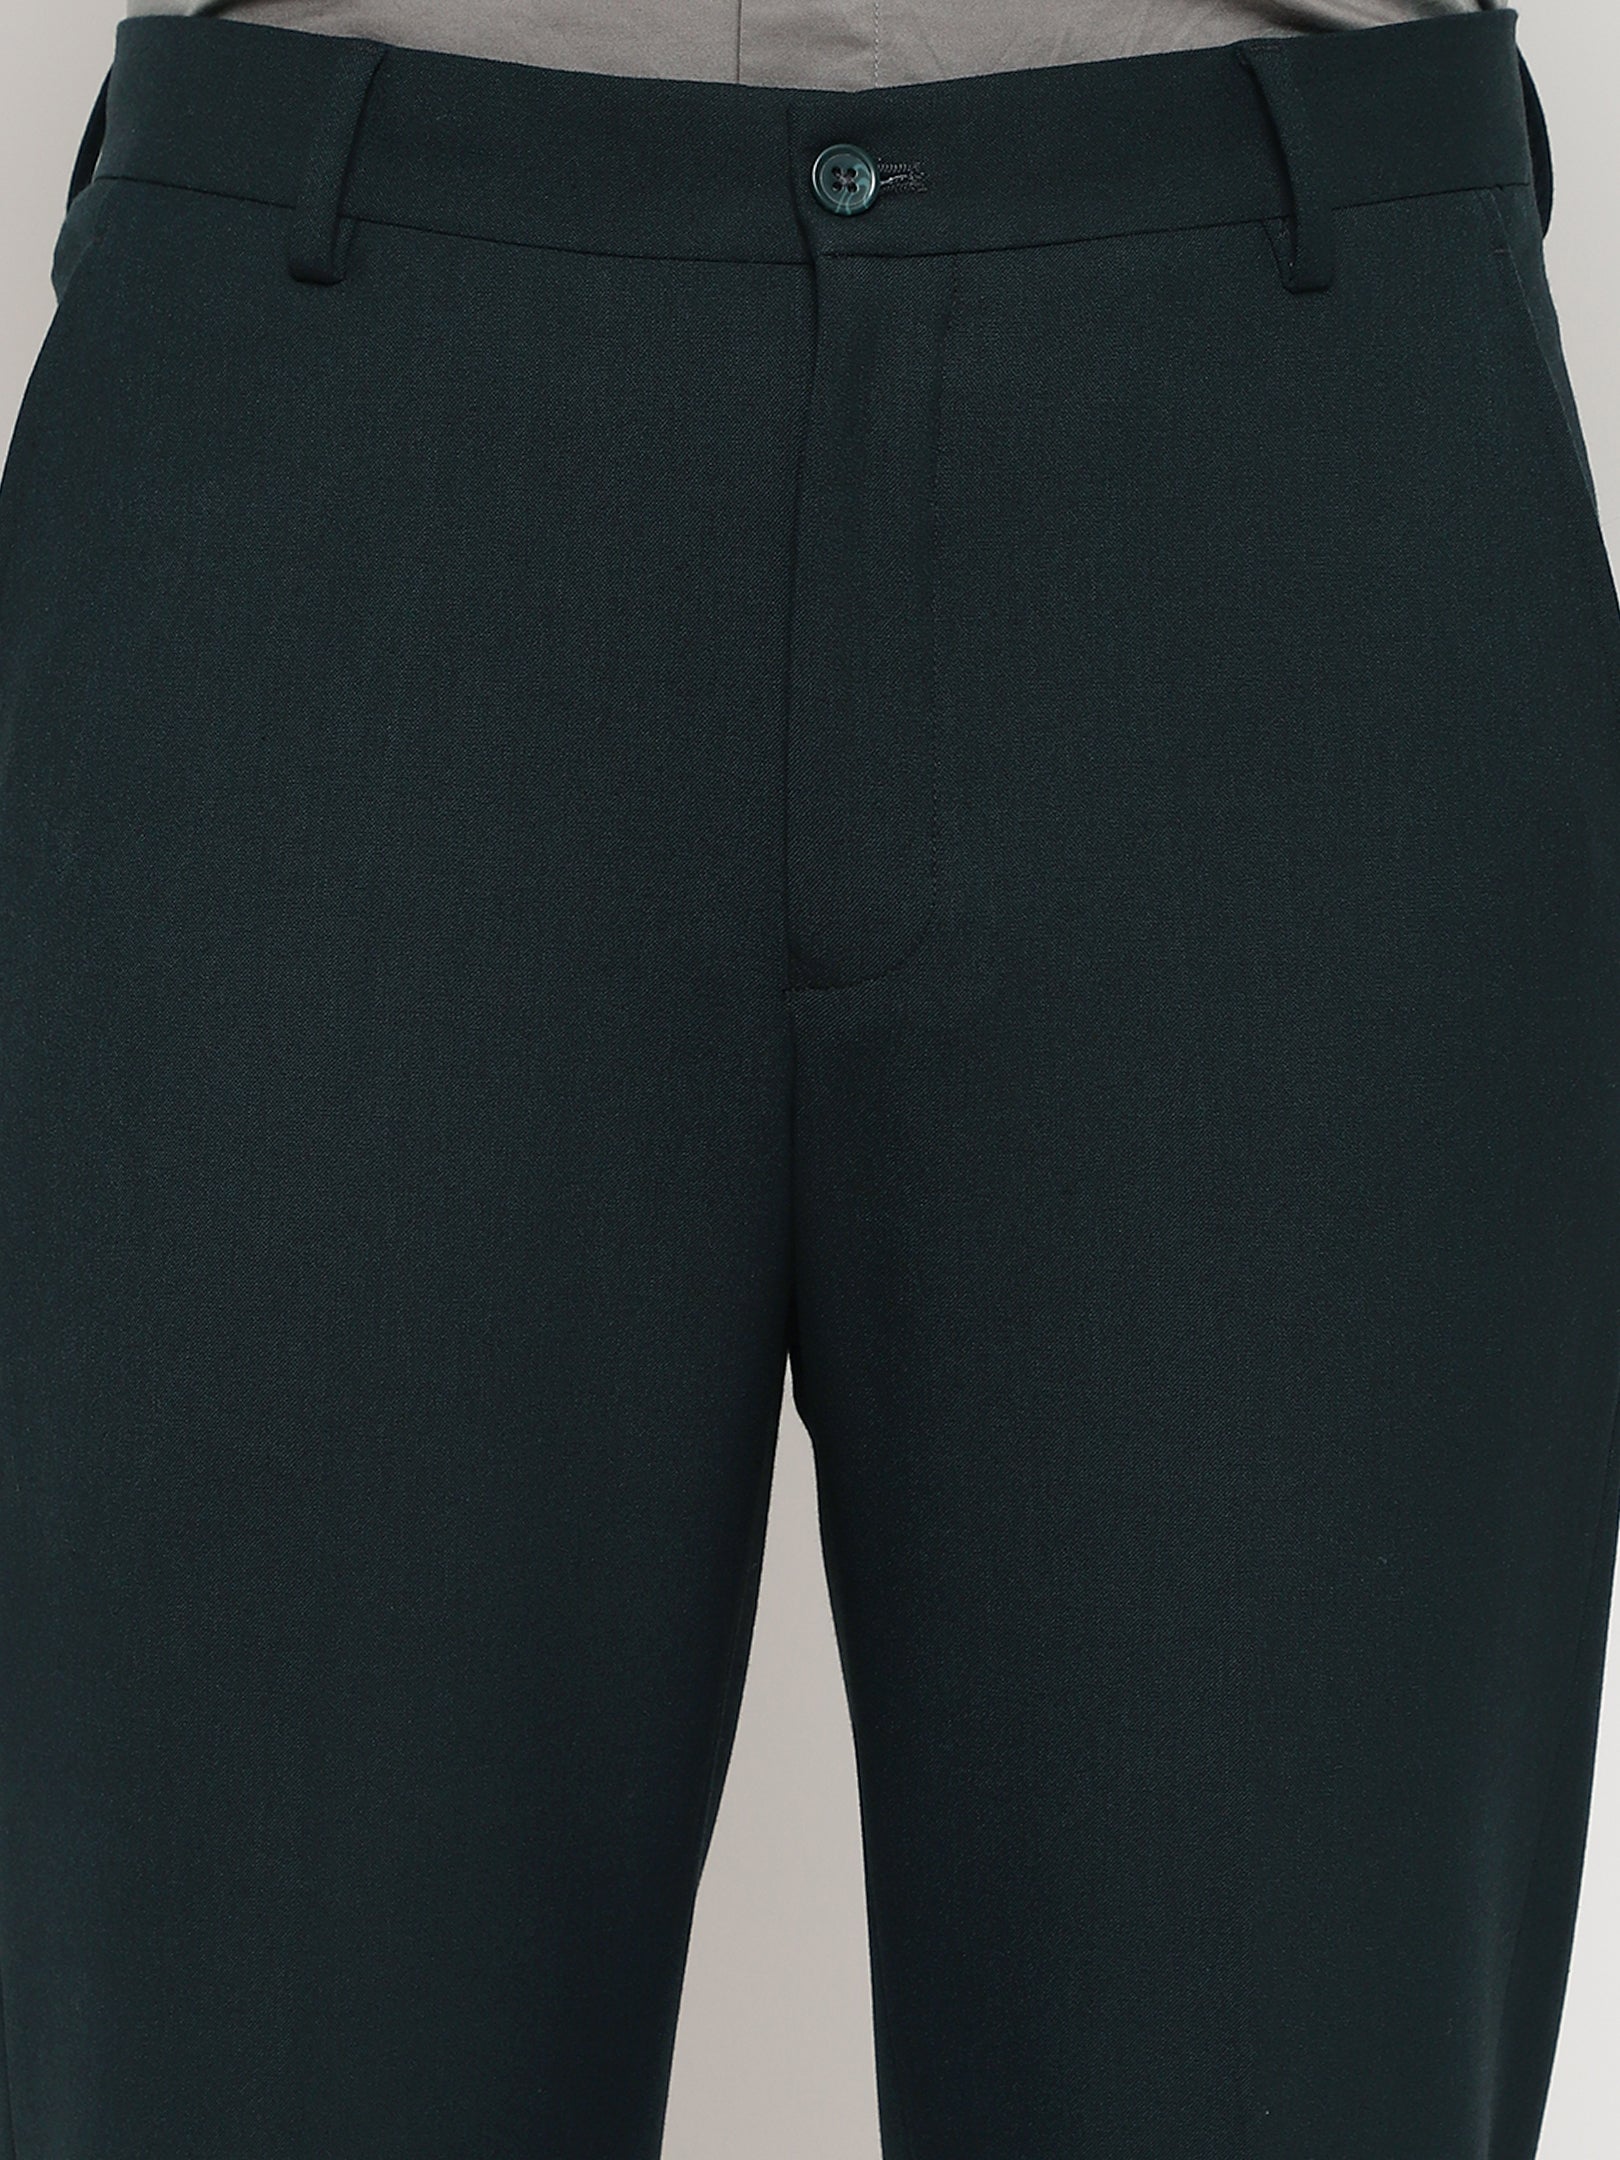 4-Way Stretch Formal Trousers in Bottle Green- Slim Fit